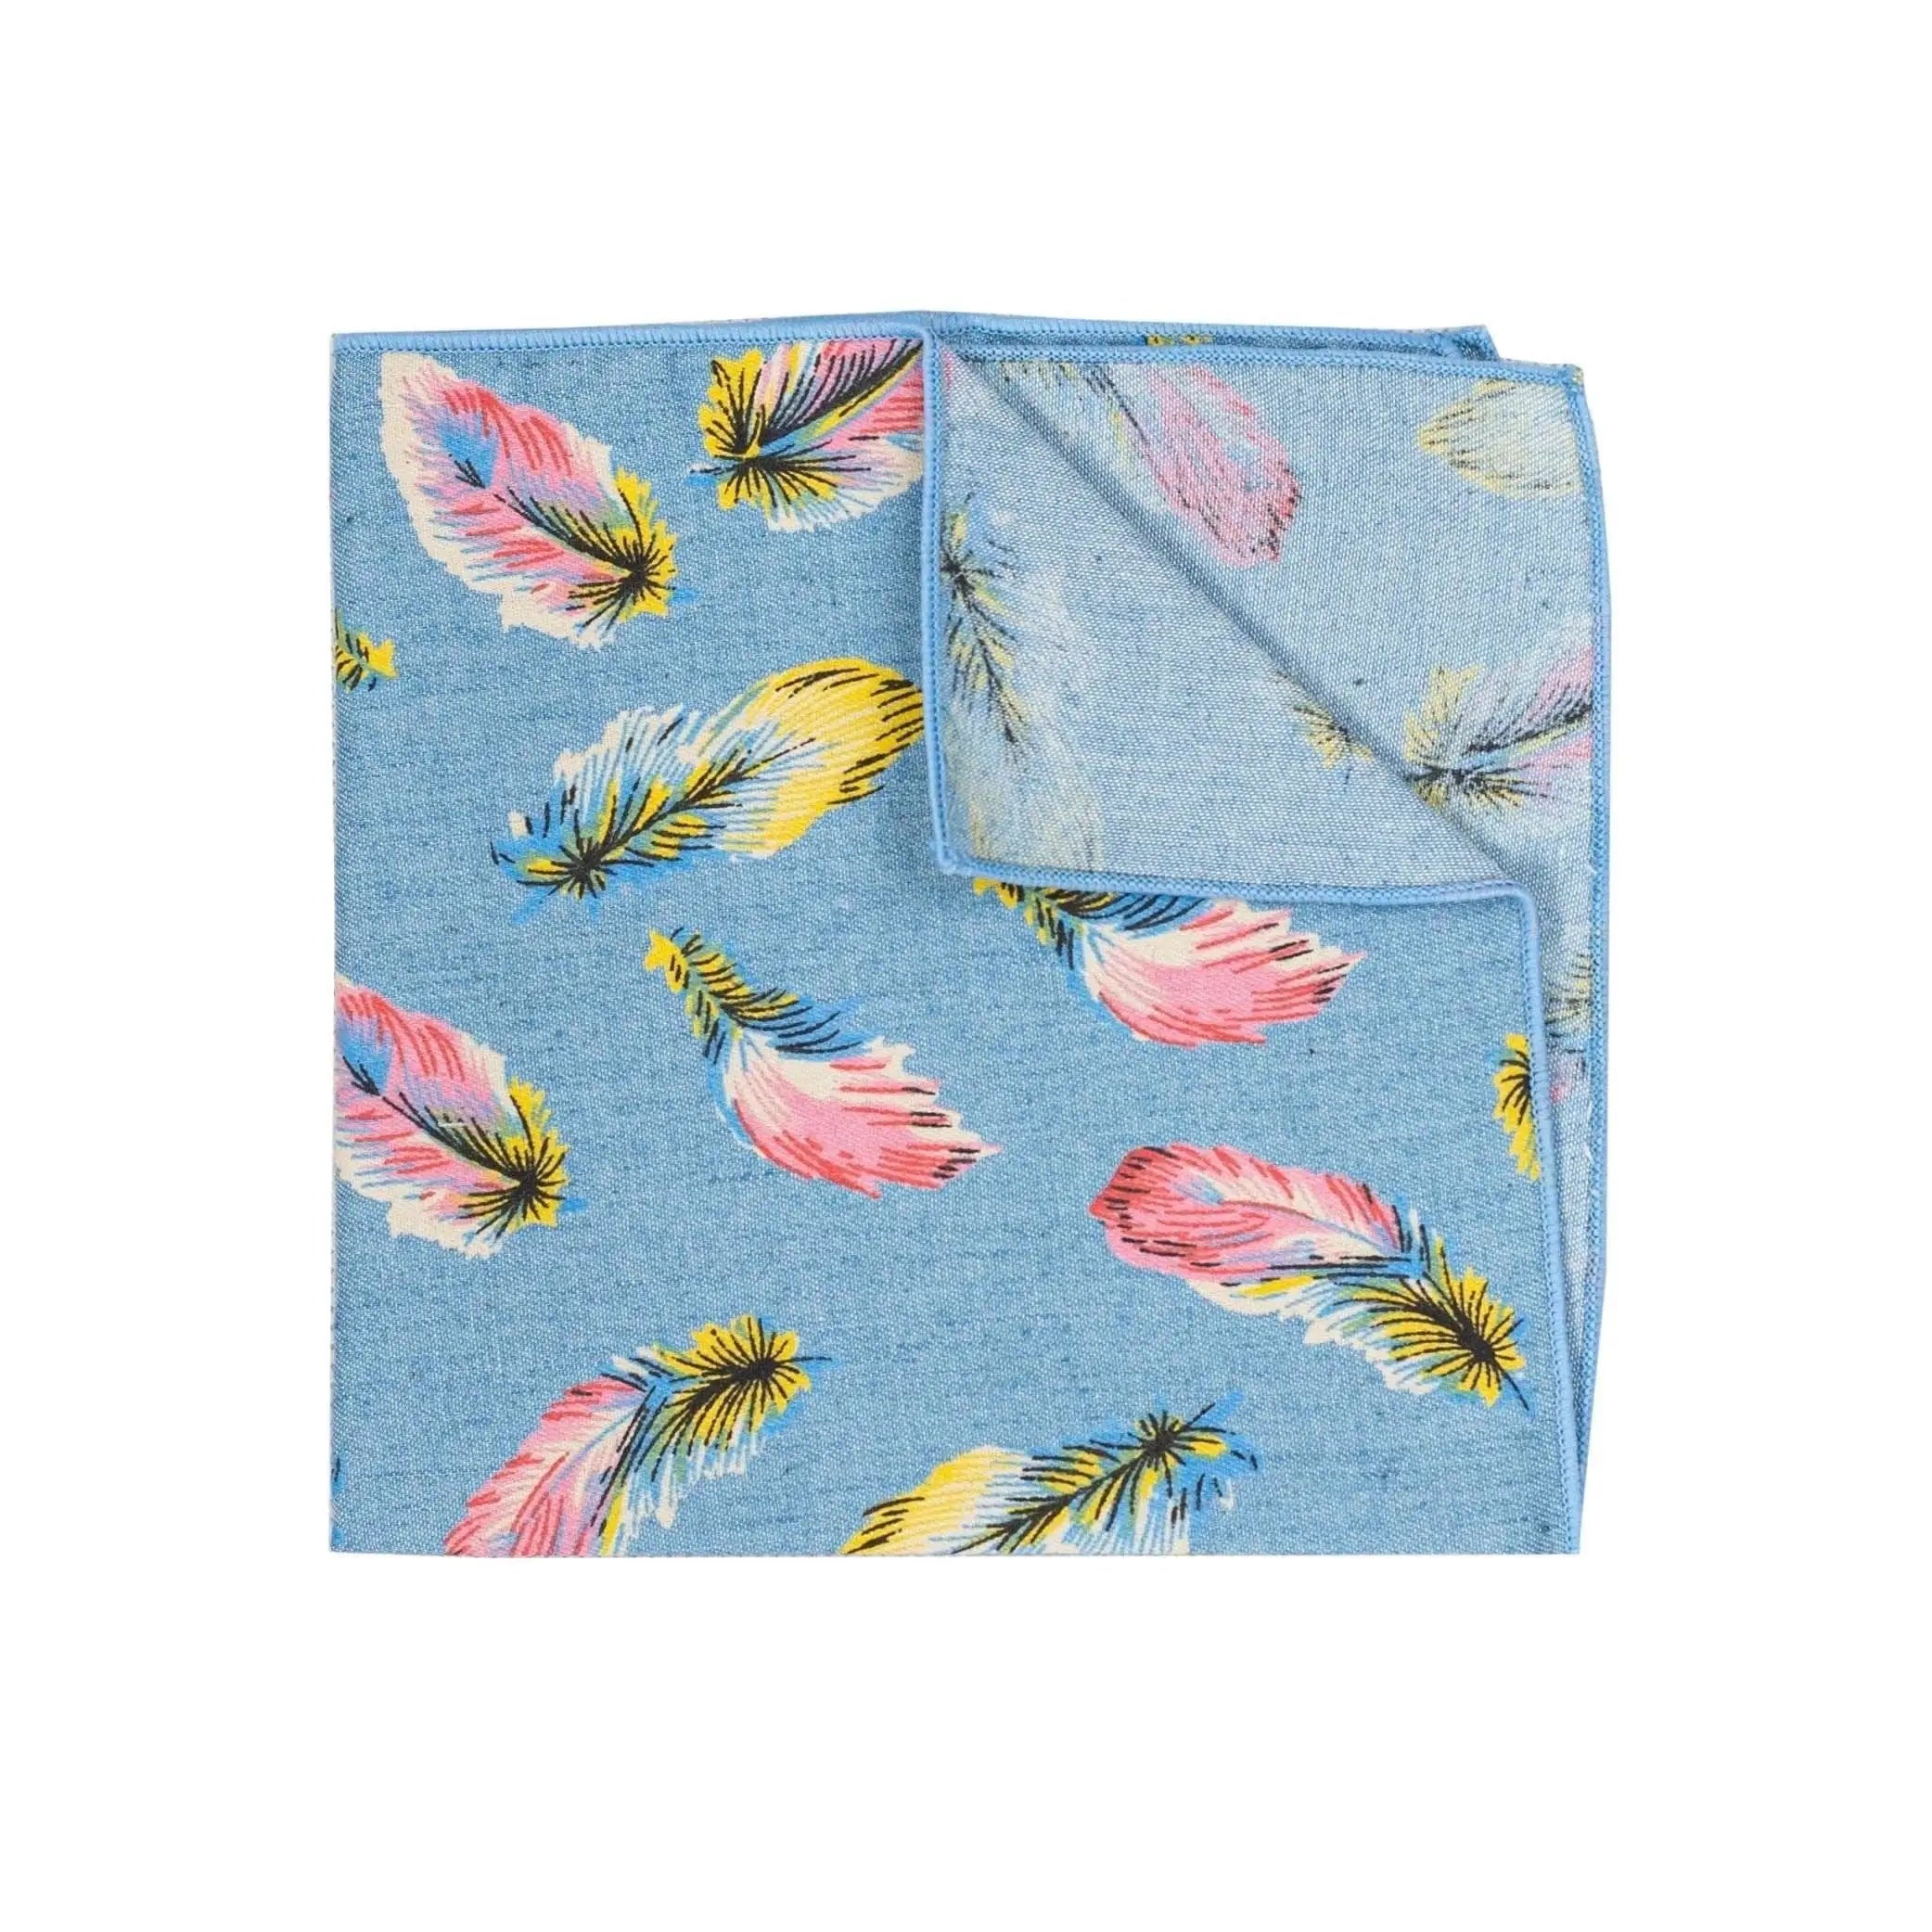 Blue Floral Pocket Square SOPHIE - MYTIESHOP Feather print Mytieshop Blue Floral Pocket Square Color: BlueMaterial CottonItem Length: 23 cm ( 9 inches)Item Width : 22 cm (8.6 inches) Dapper up your look with this colorful pocket square. This sweet pocket square is perfect for dressing up any outfit. With a blue, pink and yellow feather print, it will add some personality to your attire. This pocket square is a must-have for any man who wants to look stylish. Cotton pocket square for weddings and